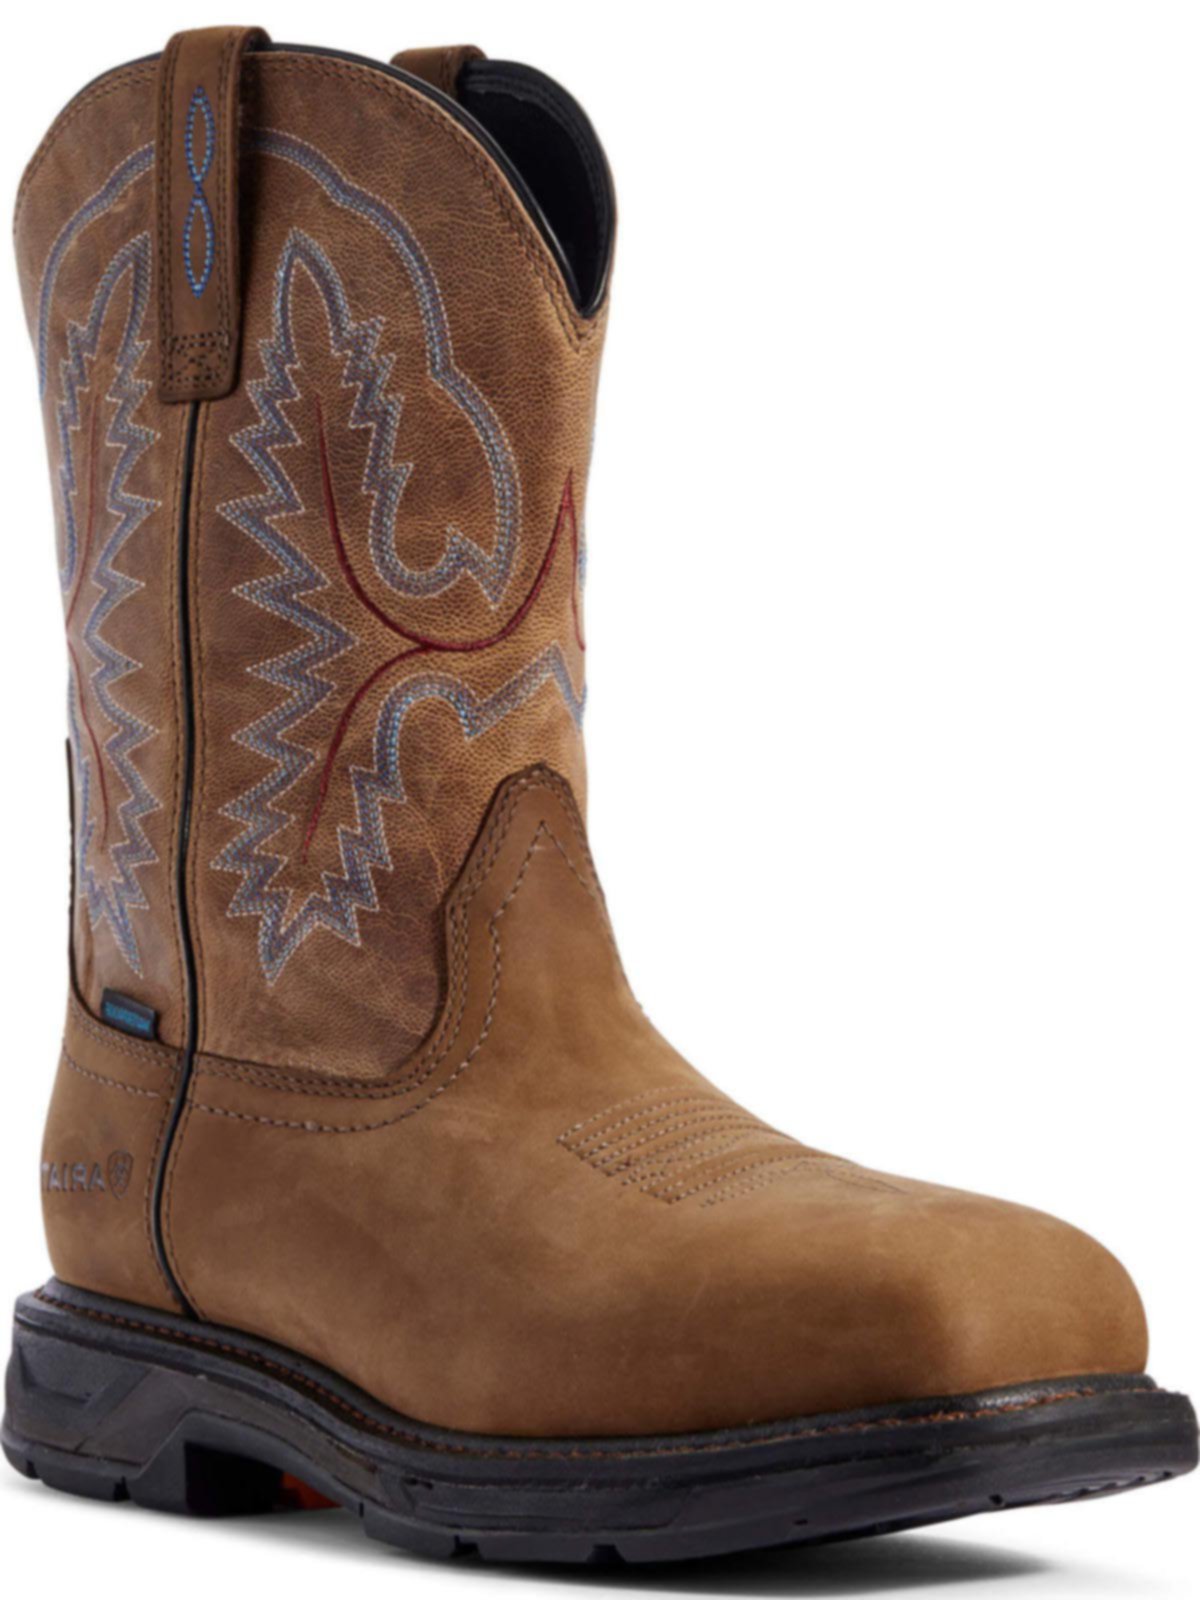 Buy > insoles for ariat work boots > in stock